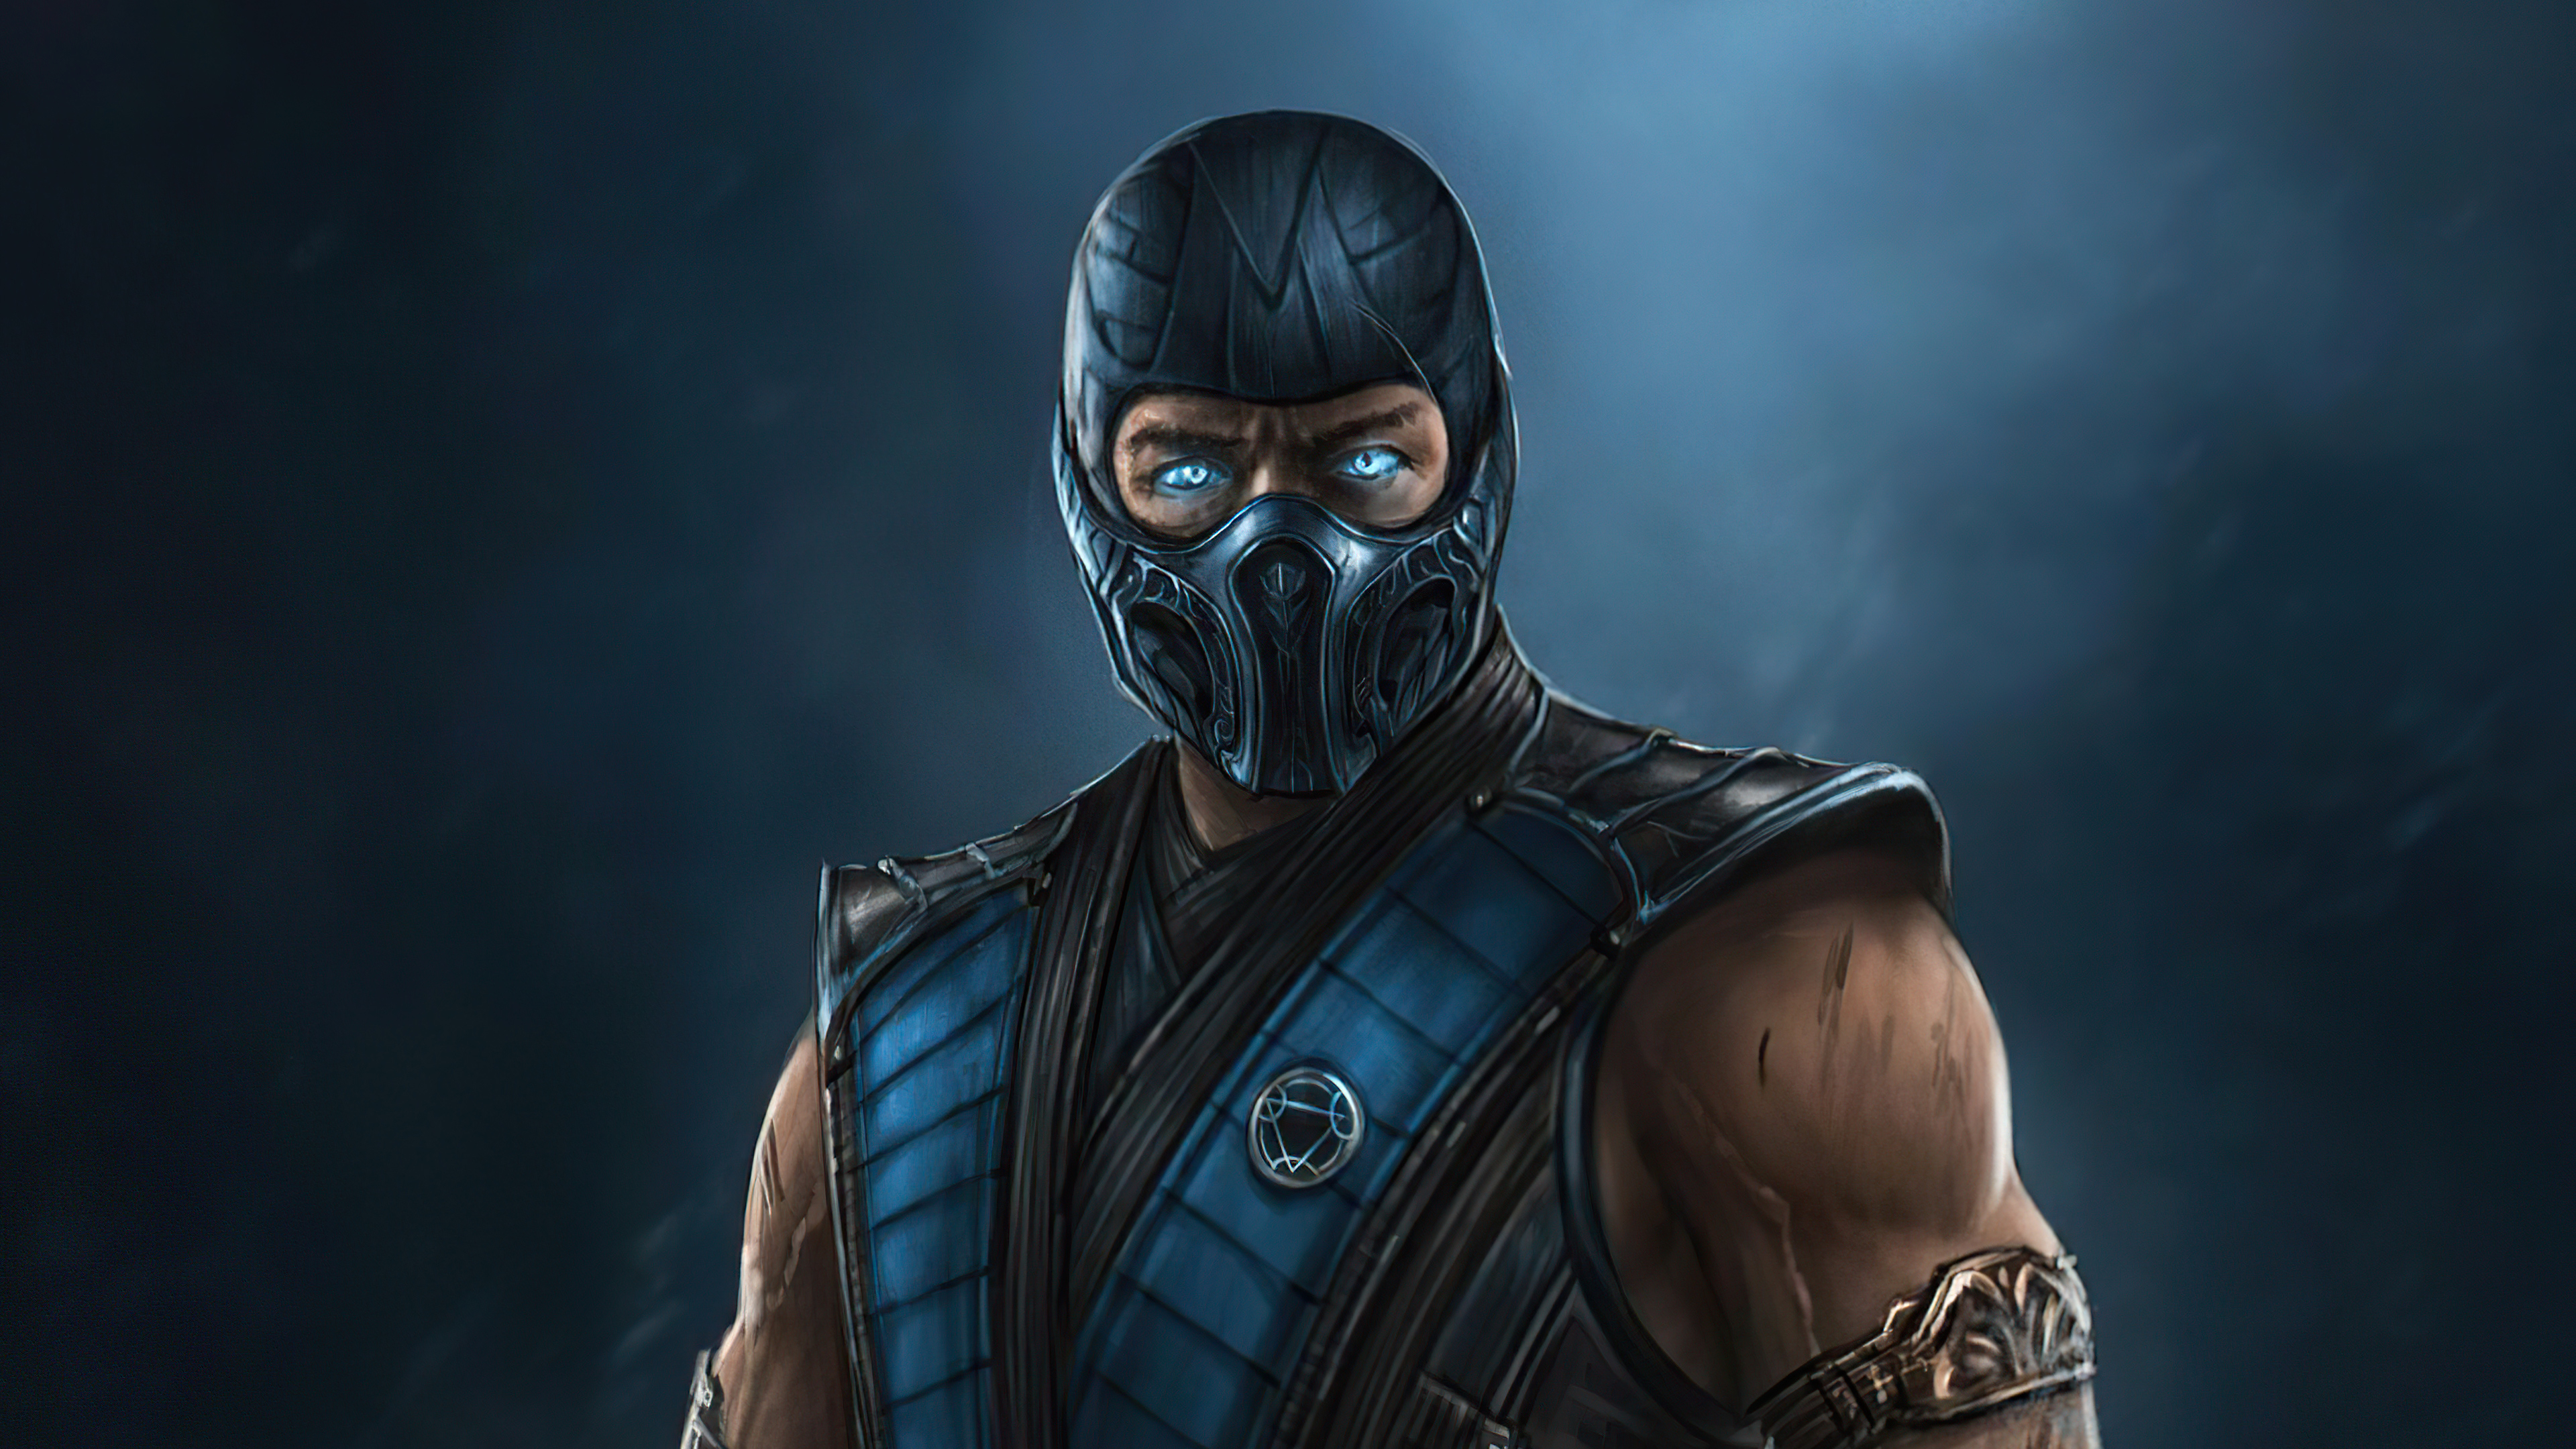 3840x2160 Sub Zero From MortalKombat Movie 4k, HD Movies, 4k Wallpapers, Images, Backgrounds, Photos and Pictures